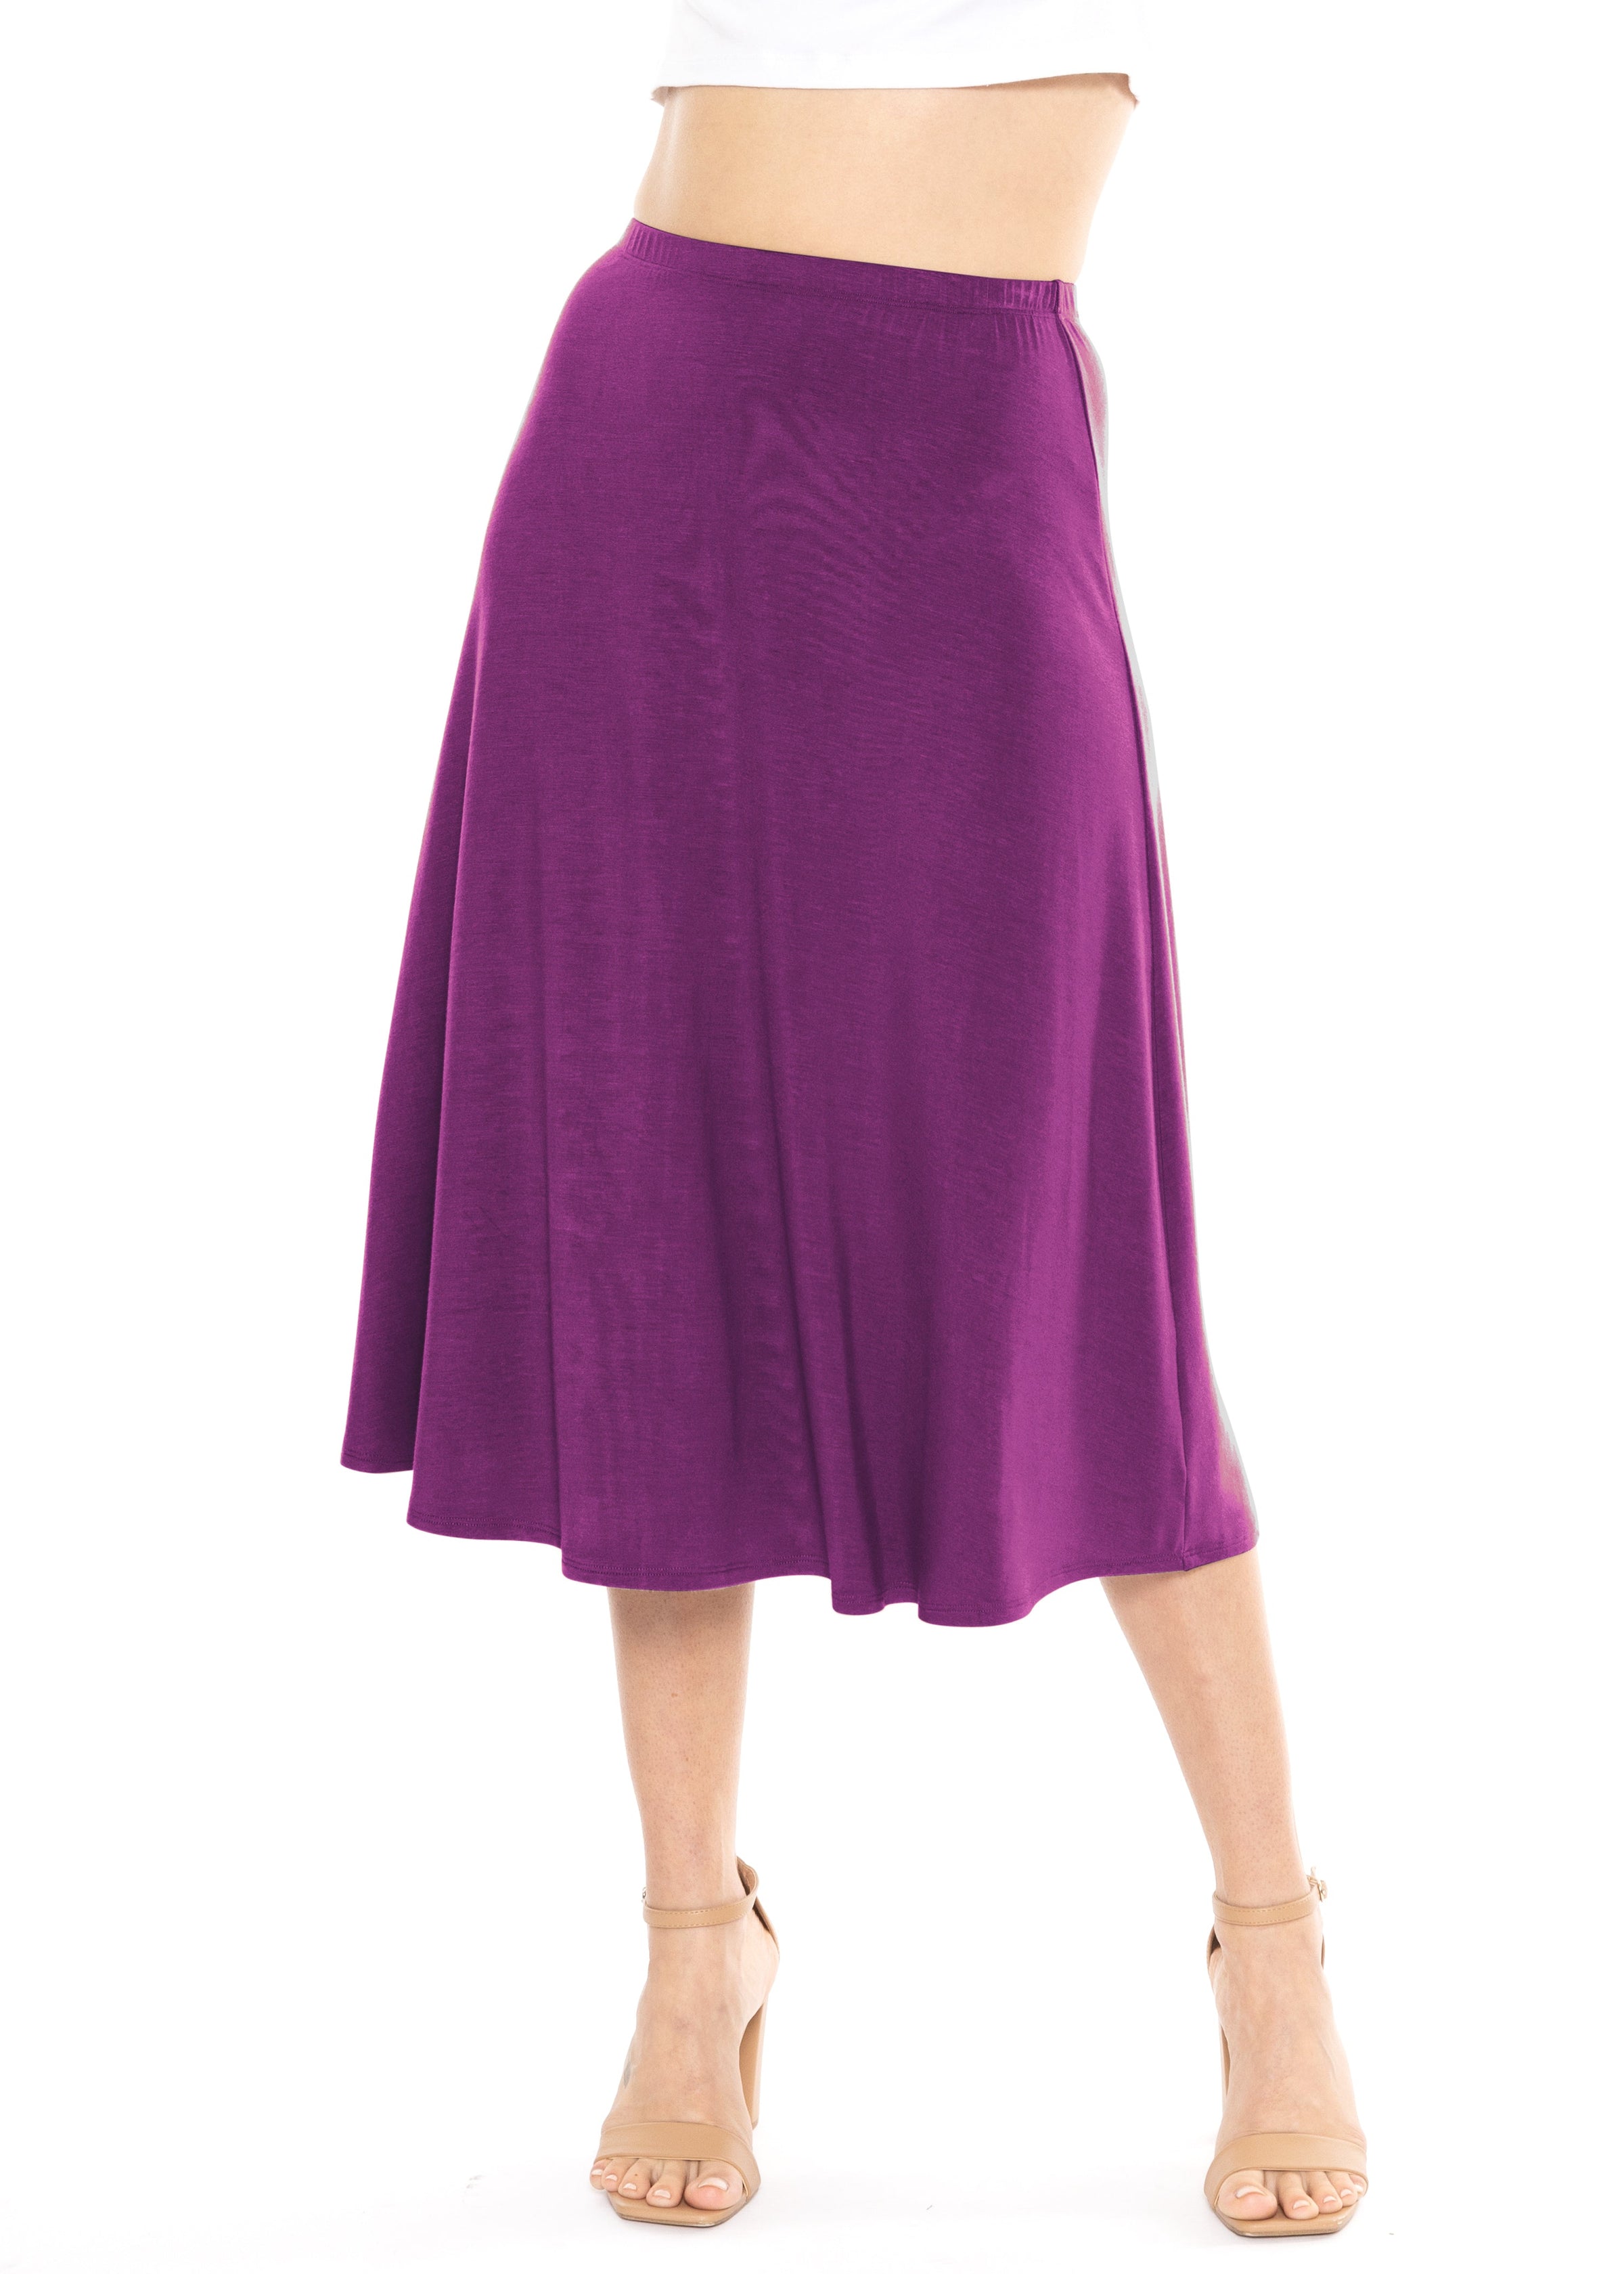 Midi A-Line Flowy Skirt, Comfortable Clothes for Women